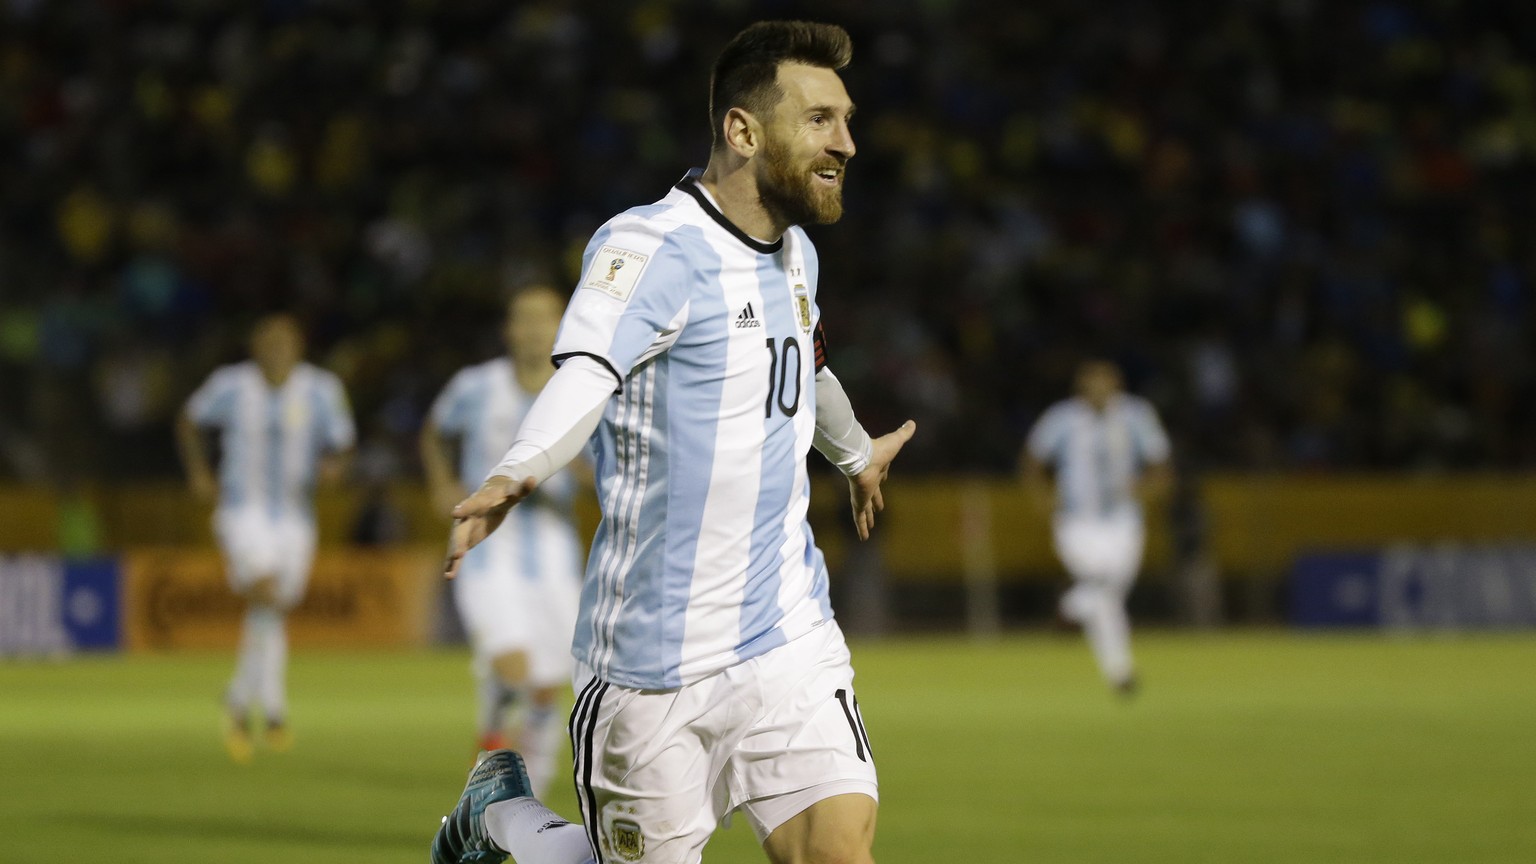 Argentina&#039;s Lionel Messi celebrates after scoring his third goal against Ecuador during their 2018 World Cup qualifying soccer match at the Atahualpa Olympic Stadium in Quito, Ecuador, Tuesday, O ...